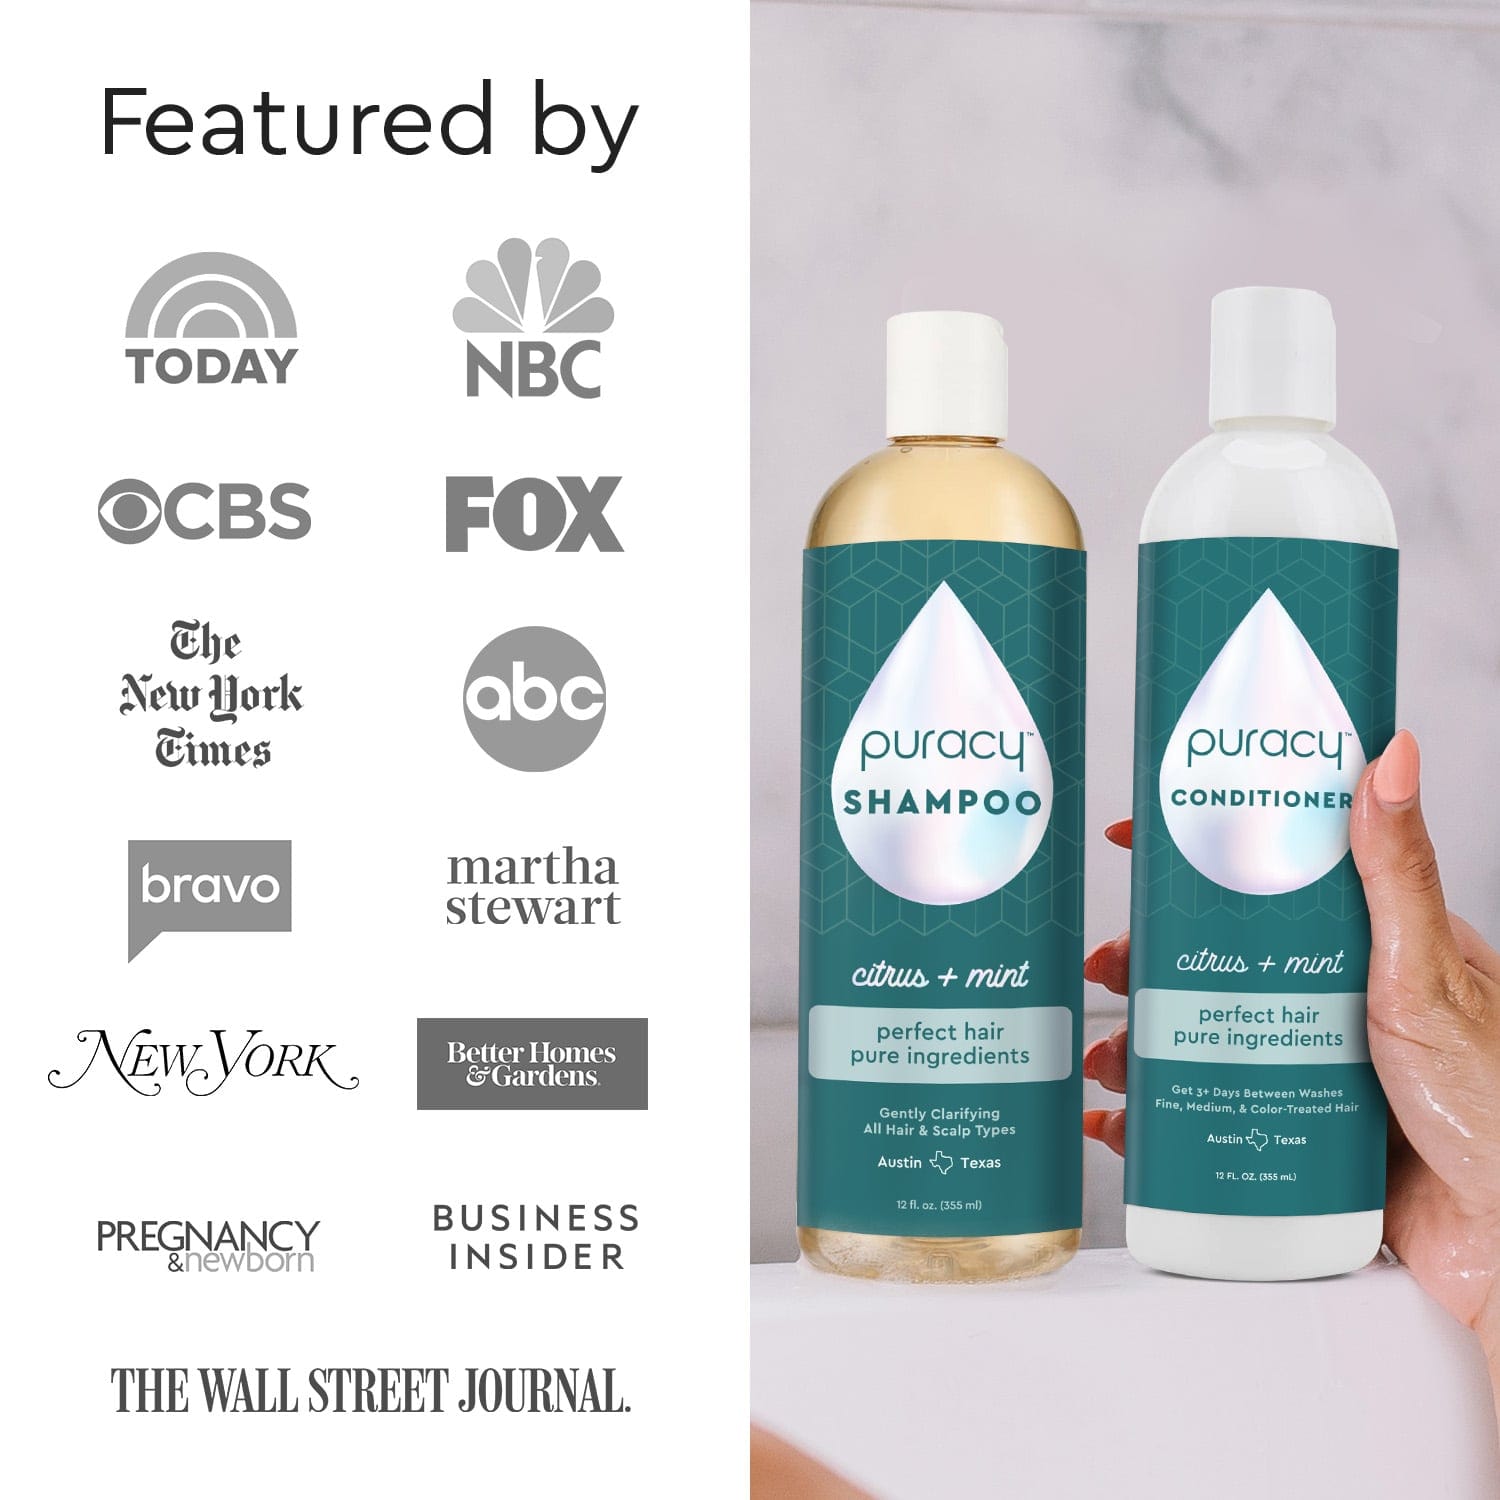 Puracy Natural Shampoo featured by media outfits